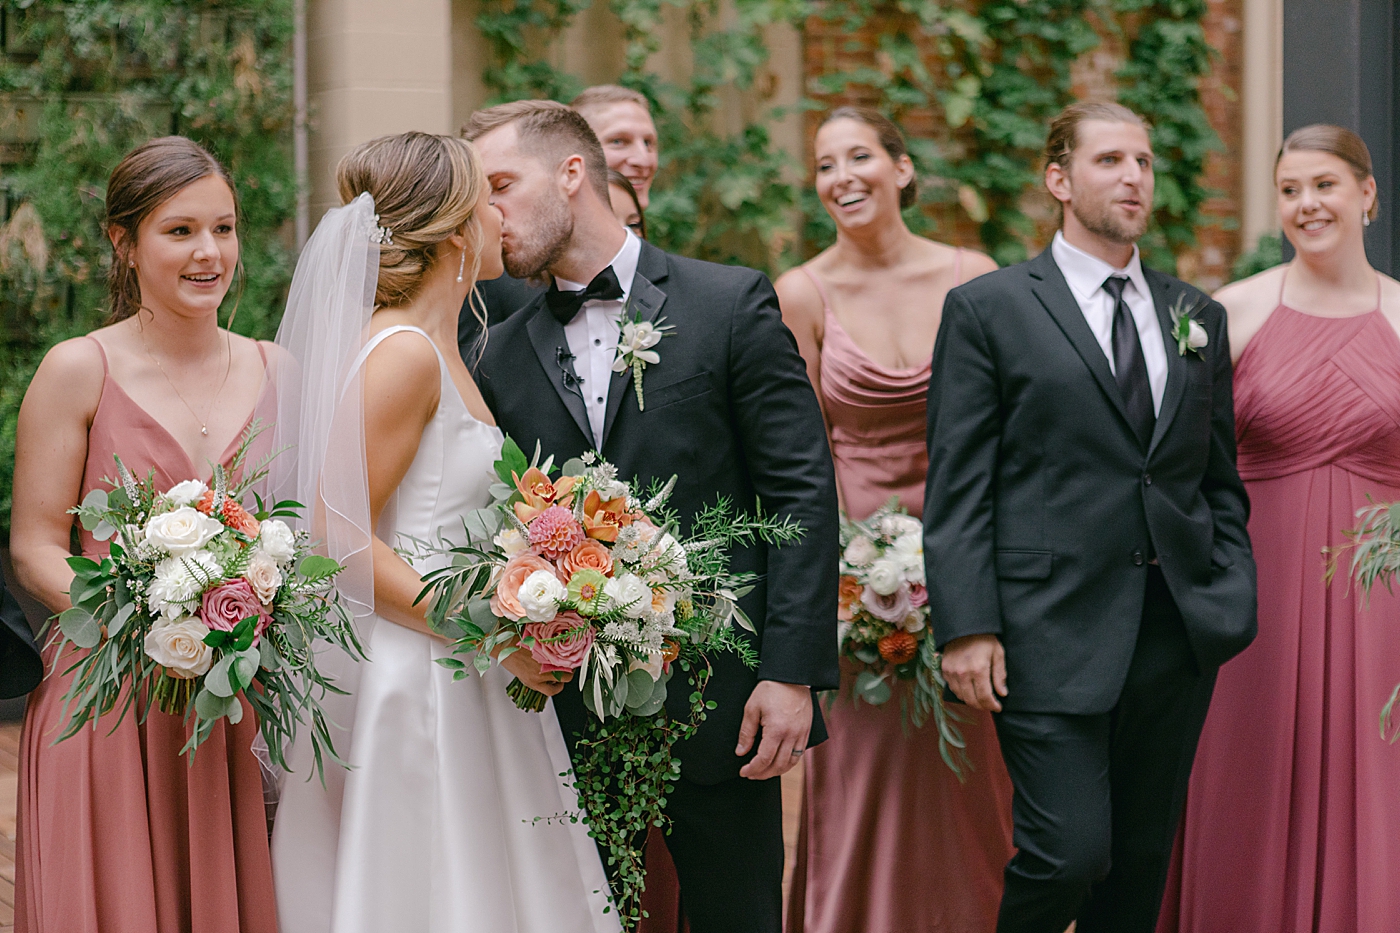 Bride and groom kissing with their wedding party in the background | Photo by Hope Helmuth Photography